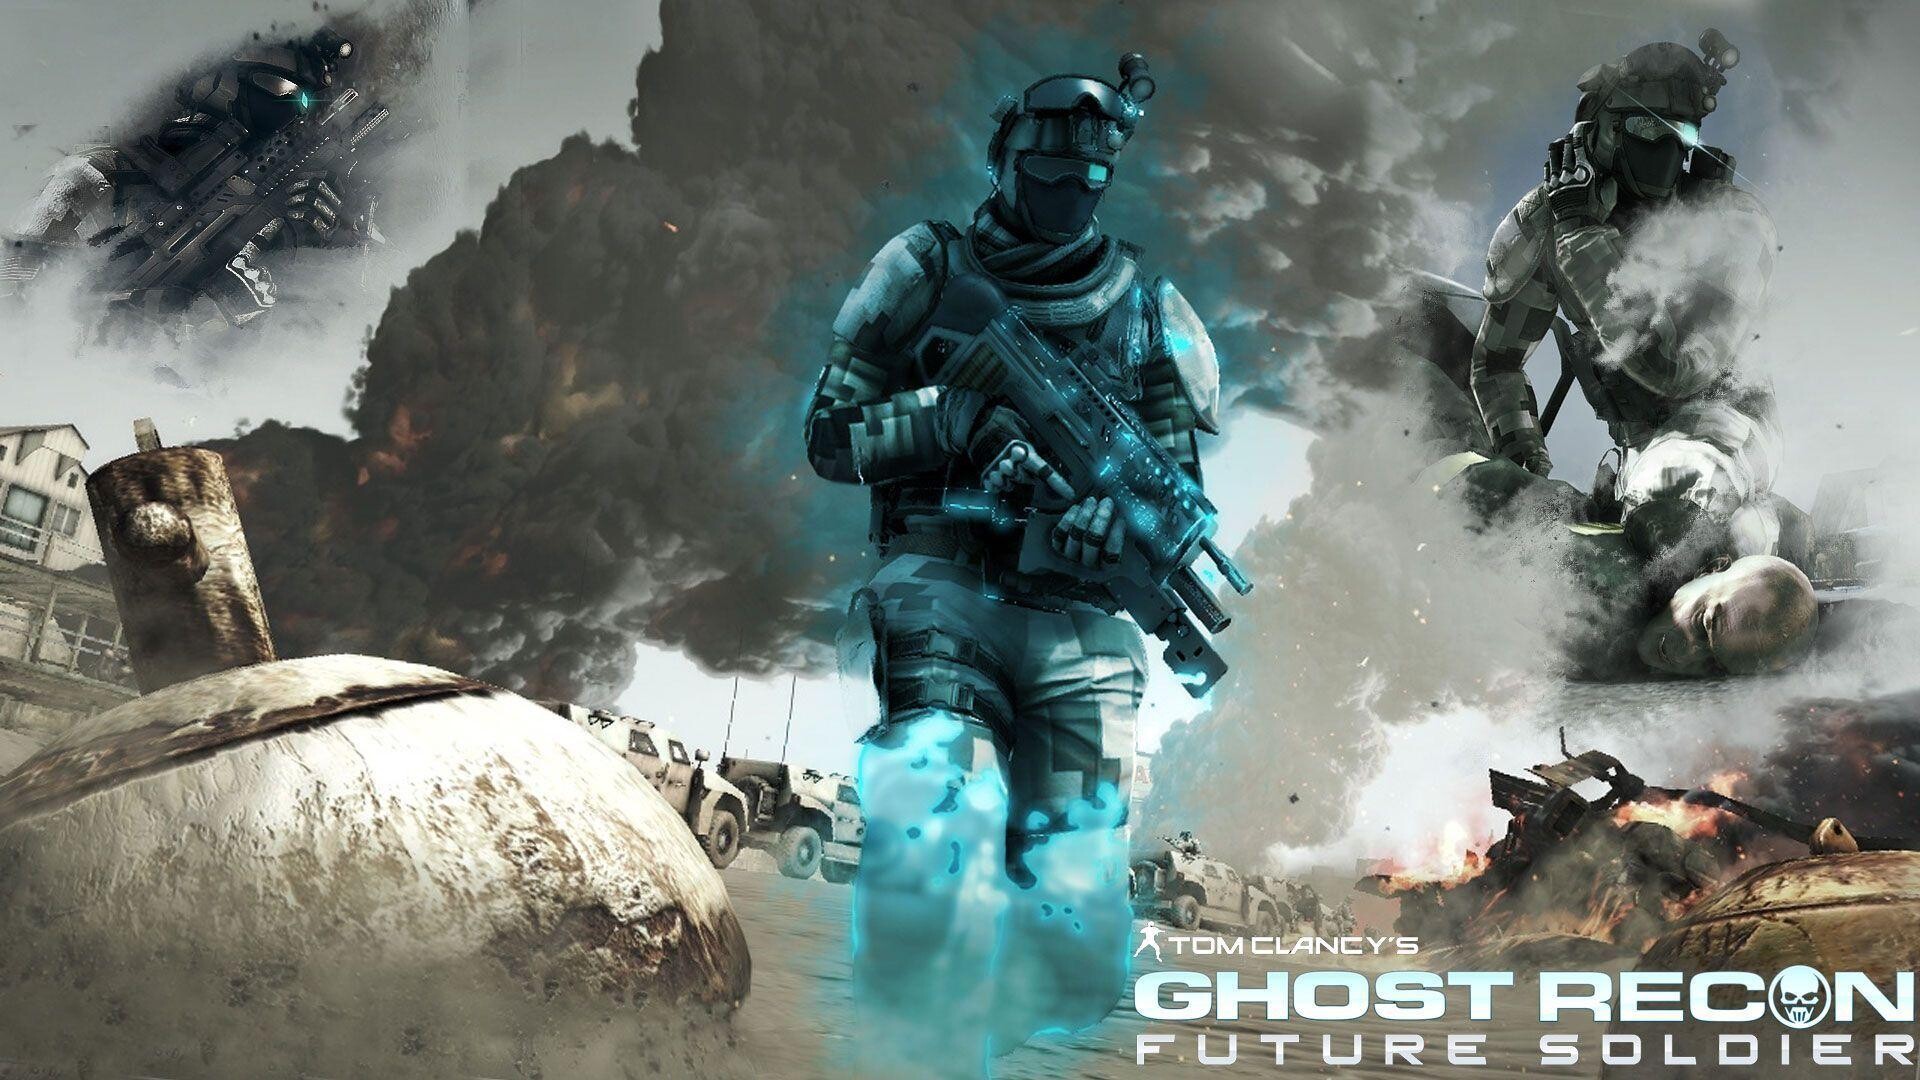 Ghost Recon: Future Soldier: Both single-player and multiplayer tactical military shooter video game, Tom Clancy. 1920x1080 Full HD Background.